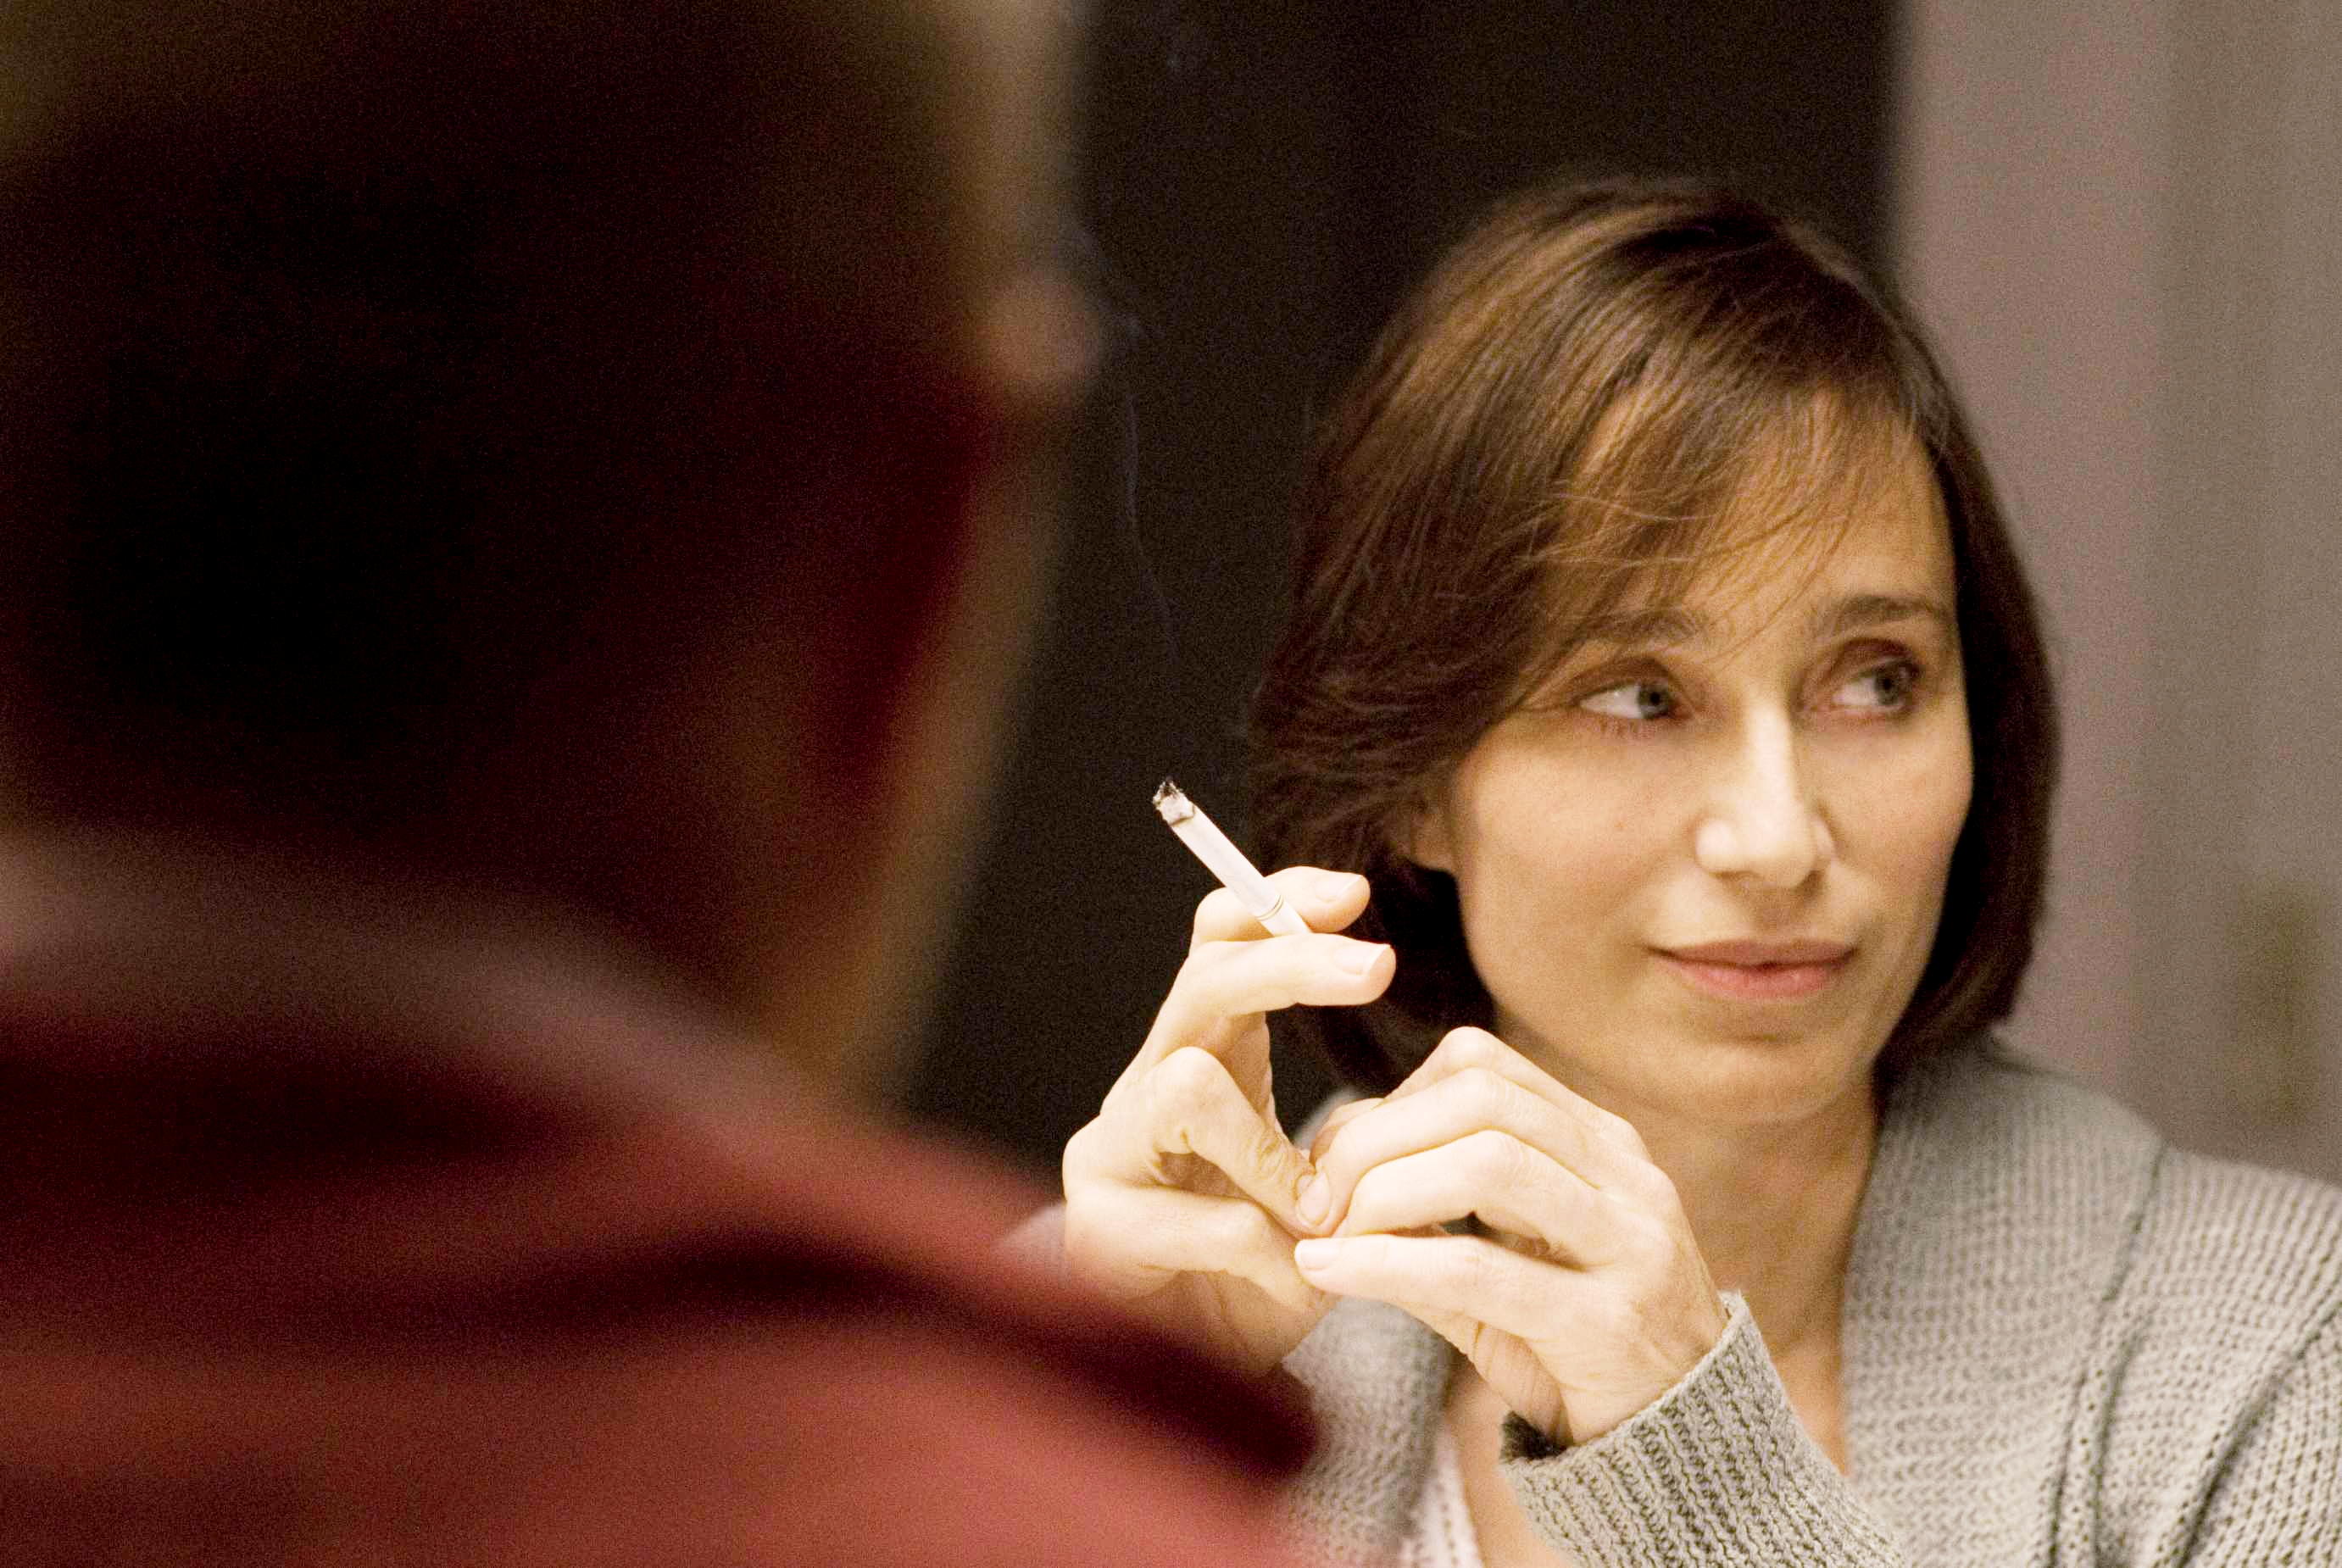 Kristin Scott Thomas stars as Juliette Fontaine in Sony Pictures Classics' I've Loved You So Long (2008). Photo credit by Thierry Valletoux.